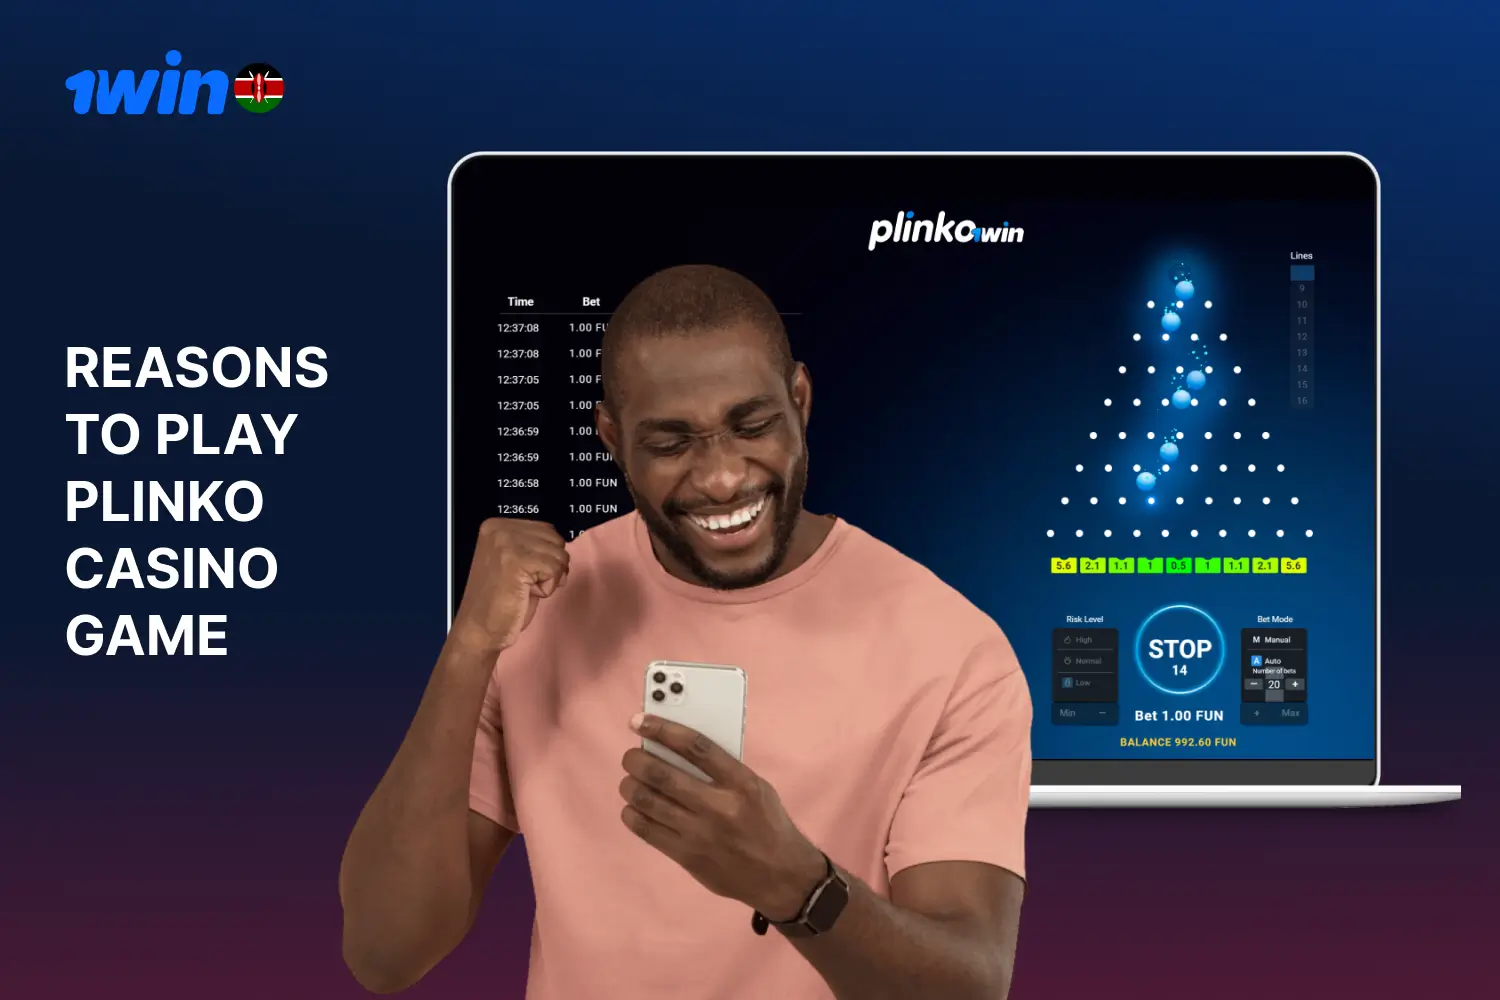 Kenyan players have many different reasons to play Plinko at 1win casino